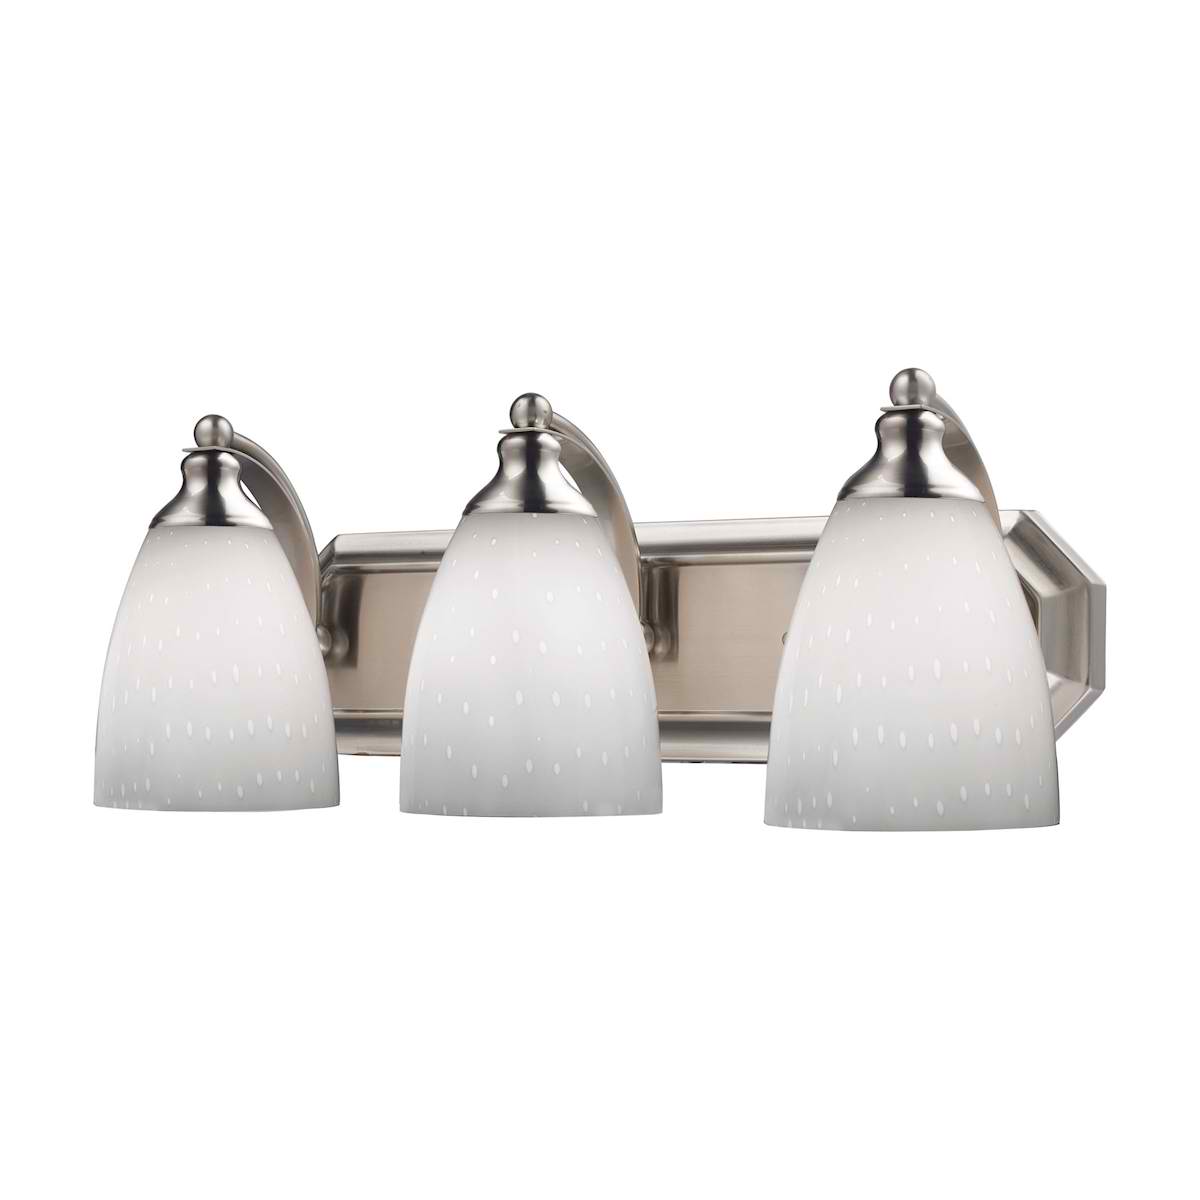 Vanity 3 Light in Satin Nickel with Simple White Glass